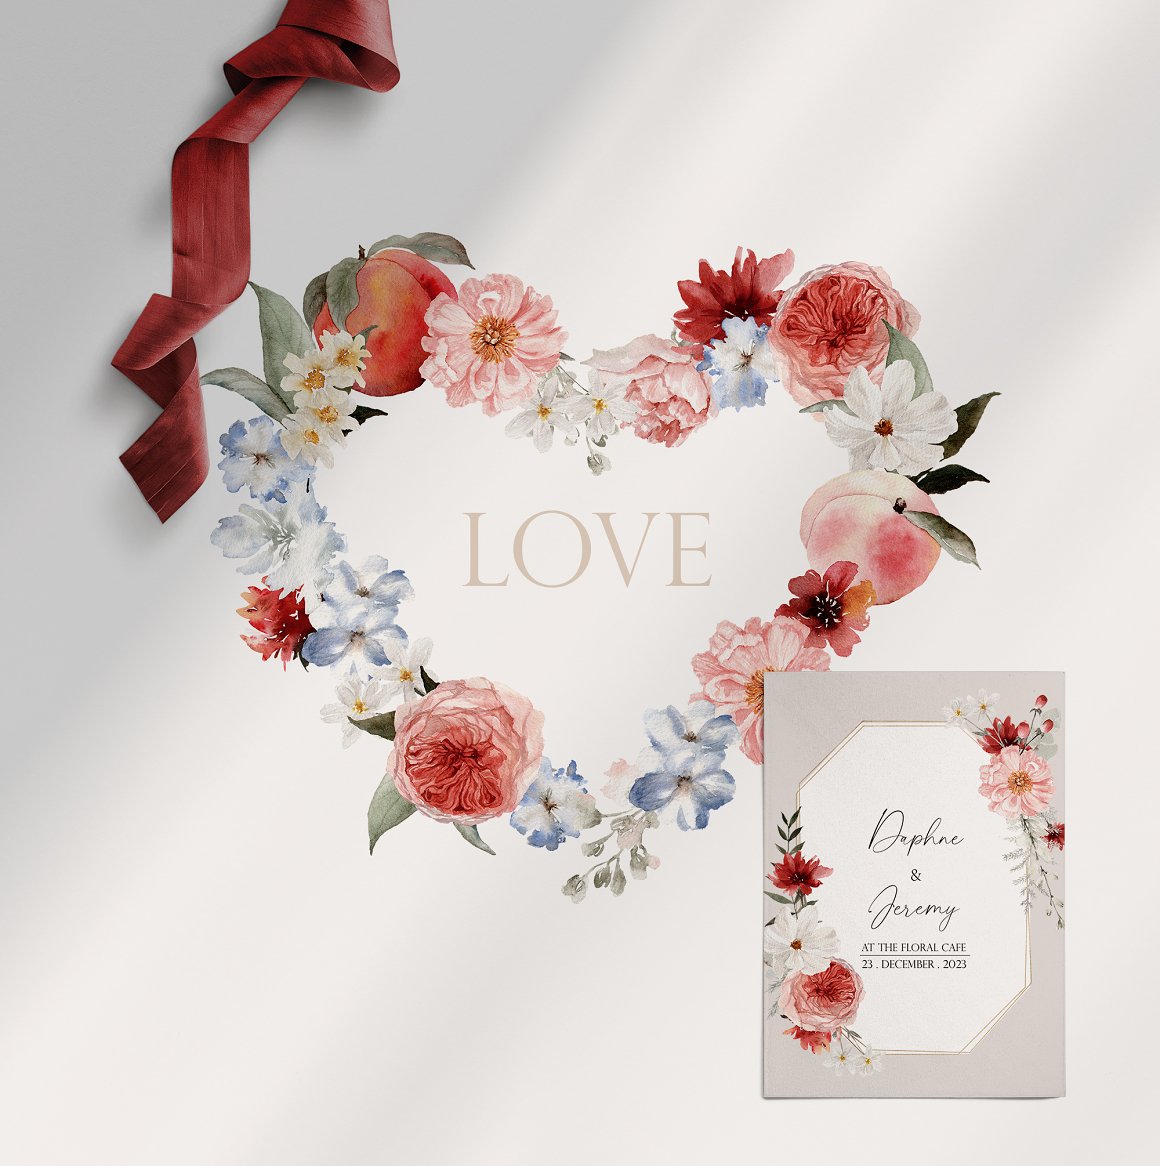 Heart of flower and peach composition and invitation card.